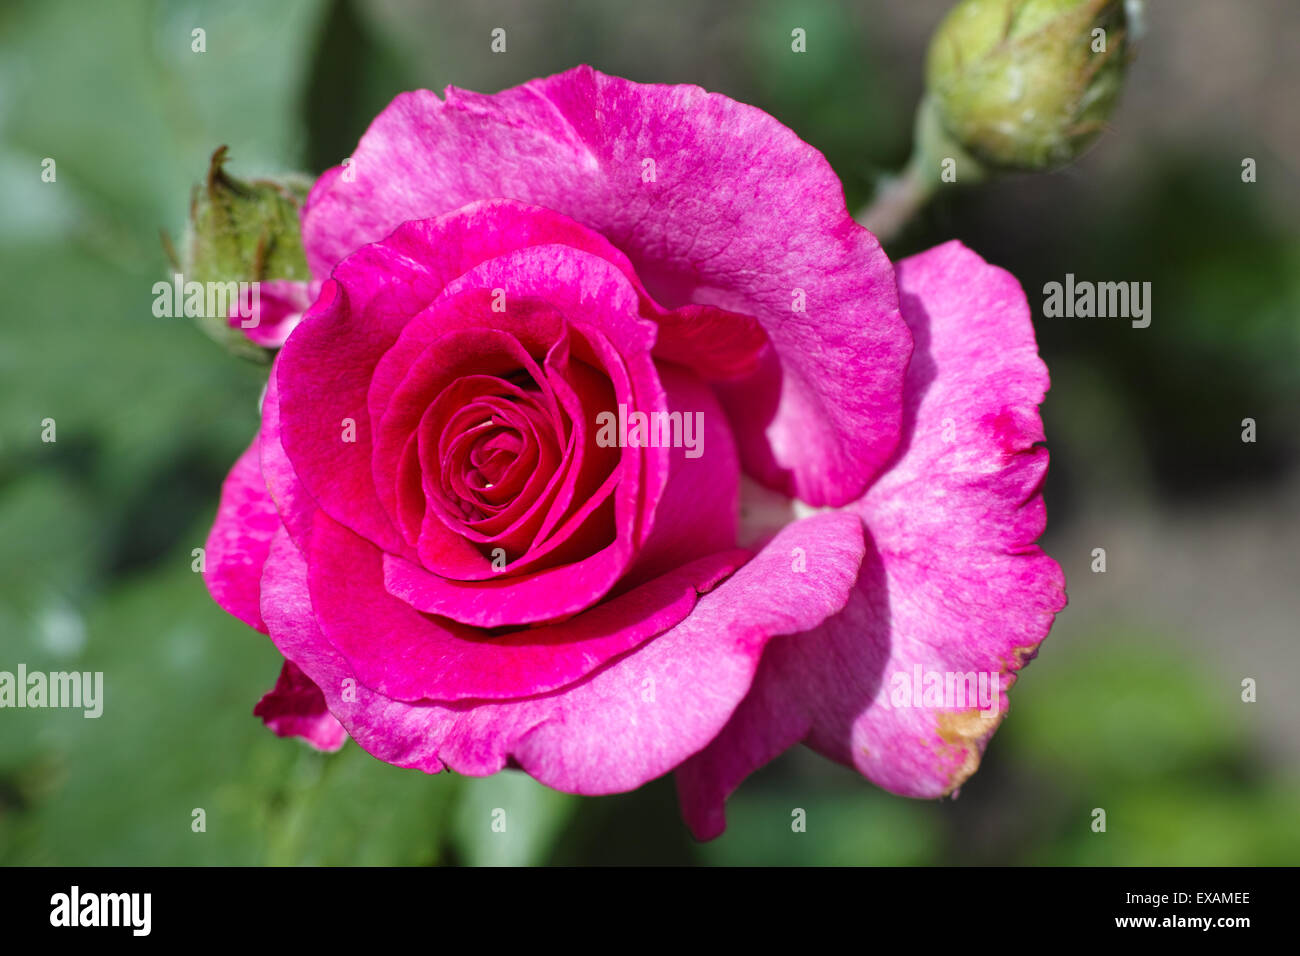 Pink rose in the garden Stock Photo